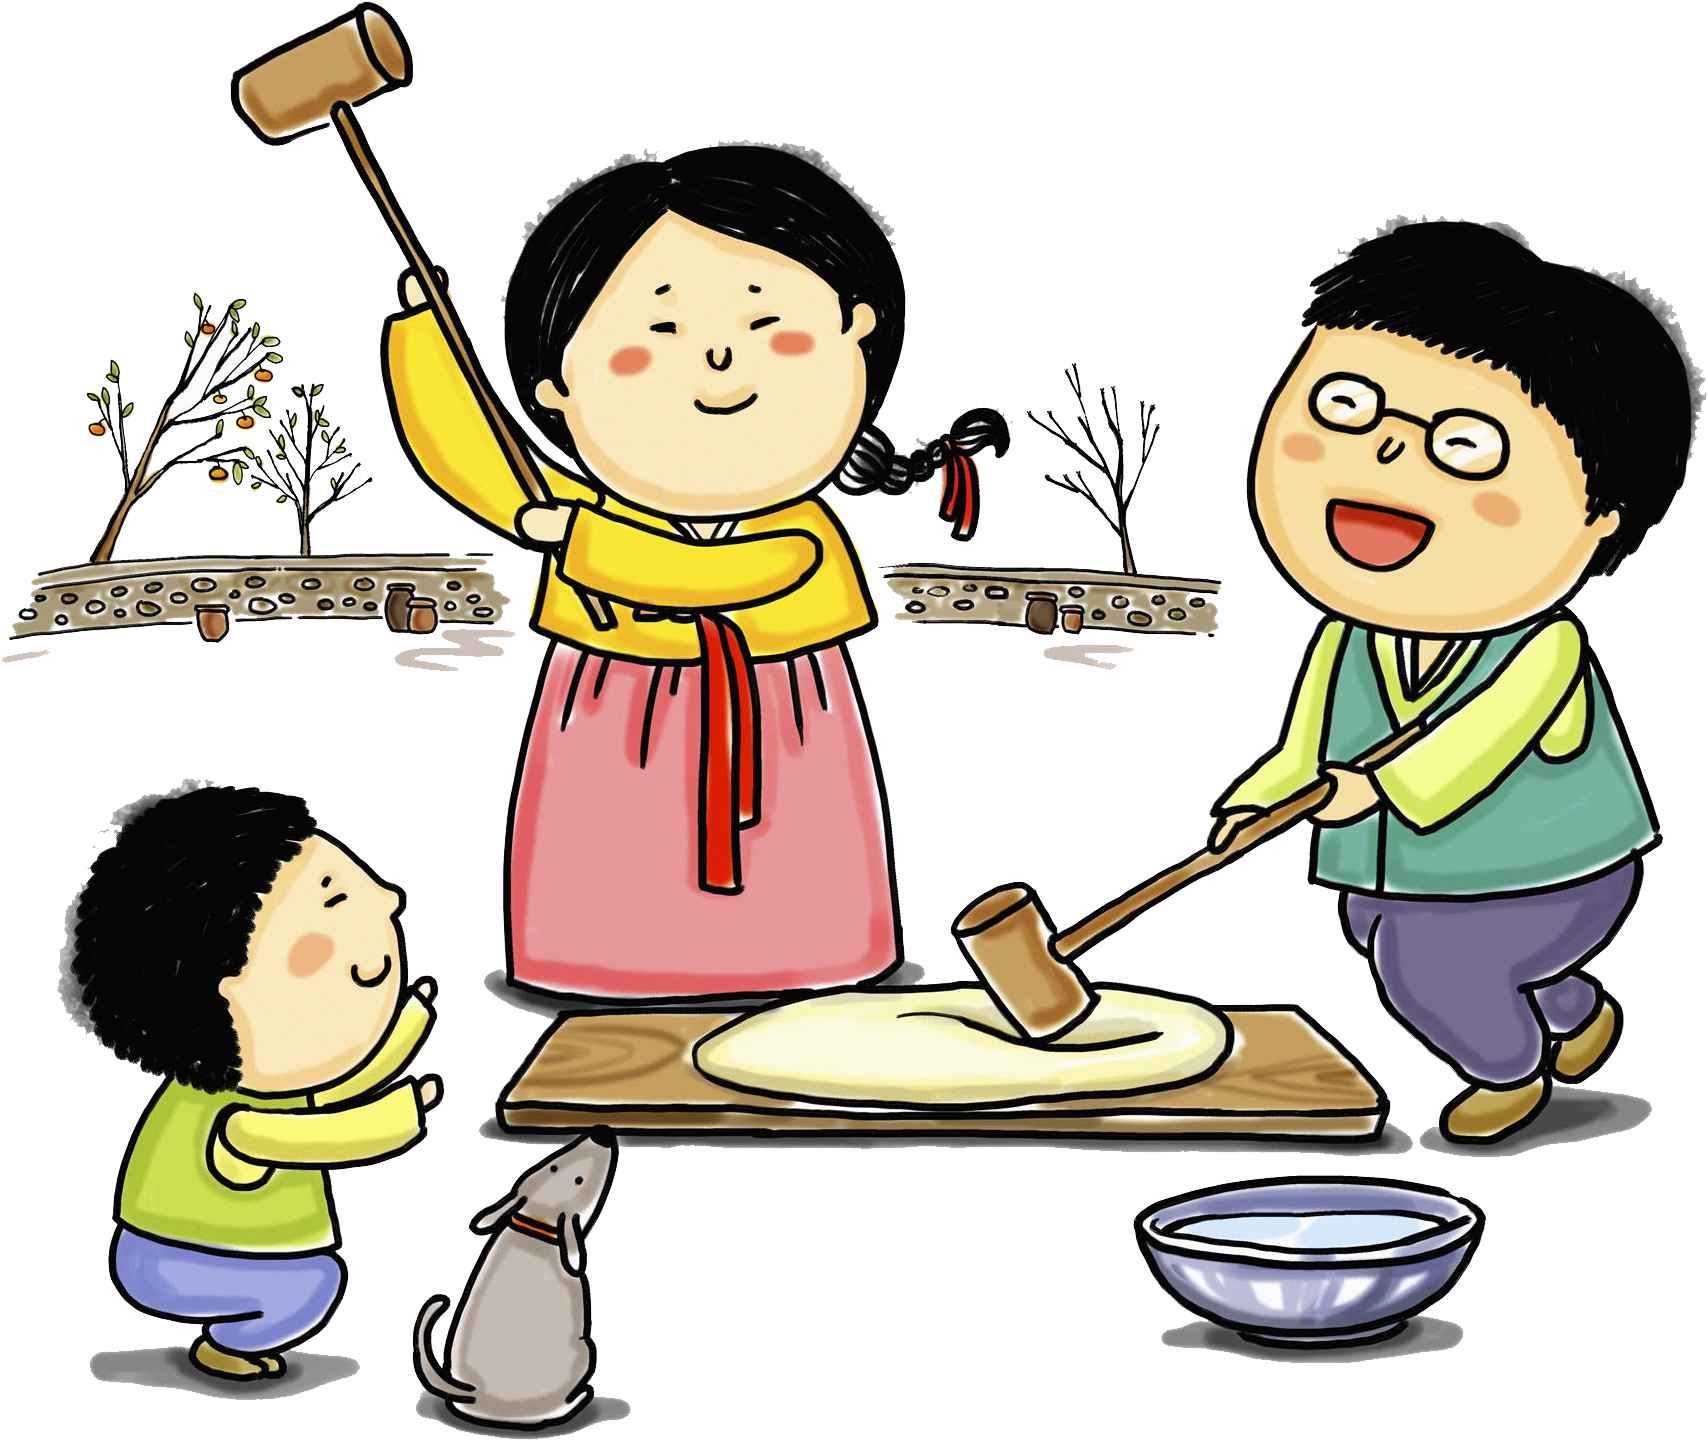 Bread Making Parents 1869*1869 Transprent Png Free - Bread Making Parents 1869*1869 Transprent Png Free (1869x1869)